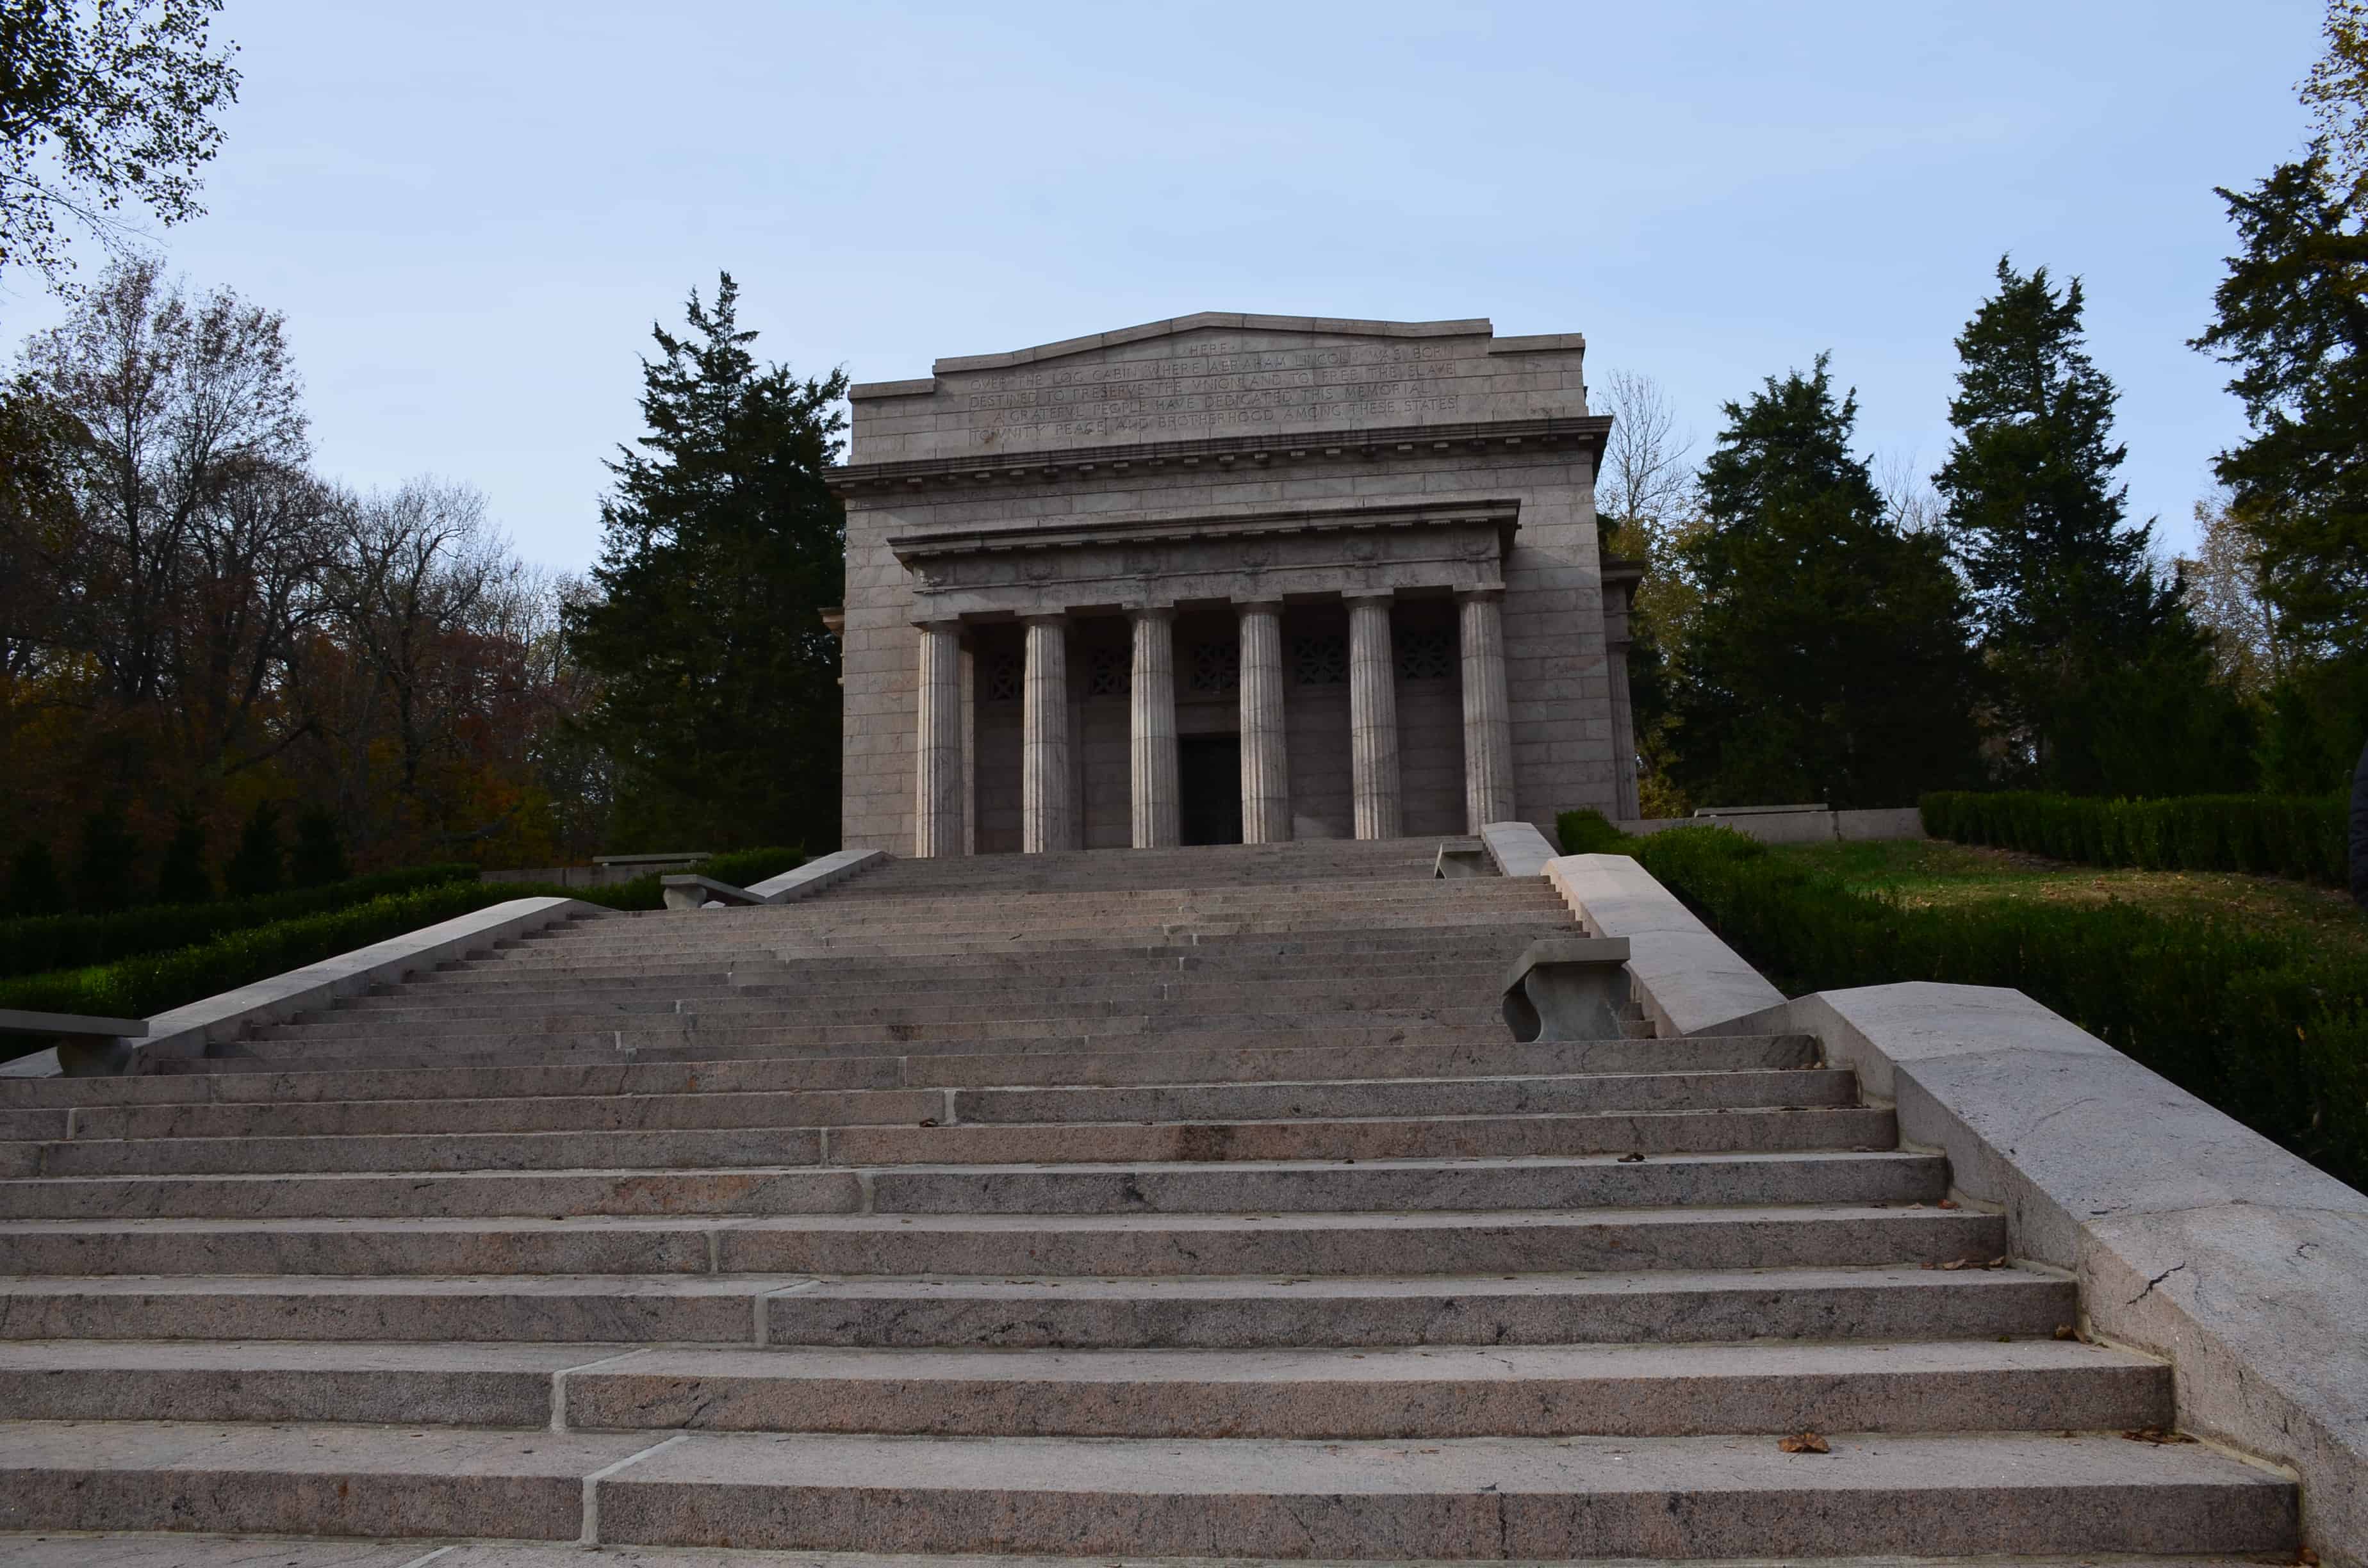 Steps up to the Memorial Building at Abraham Lincoln Birthplace National Historical Park in Kentucky